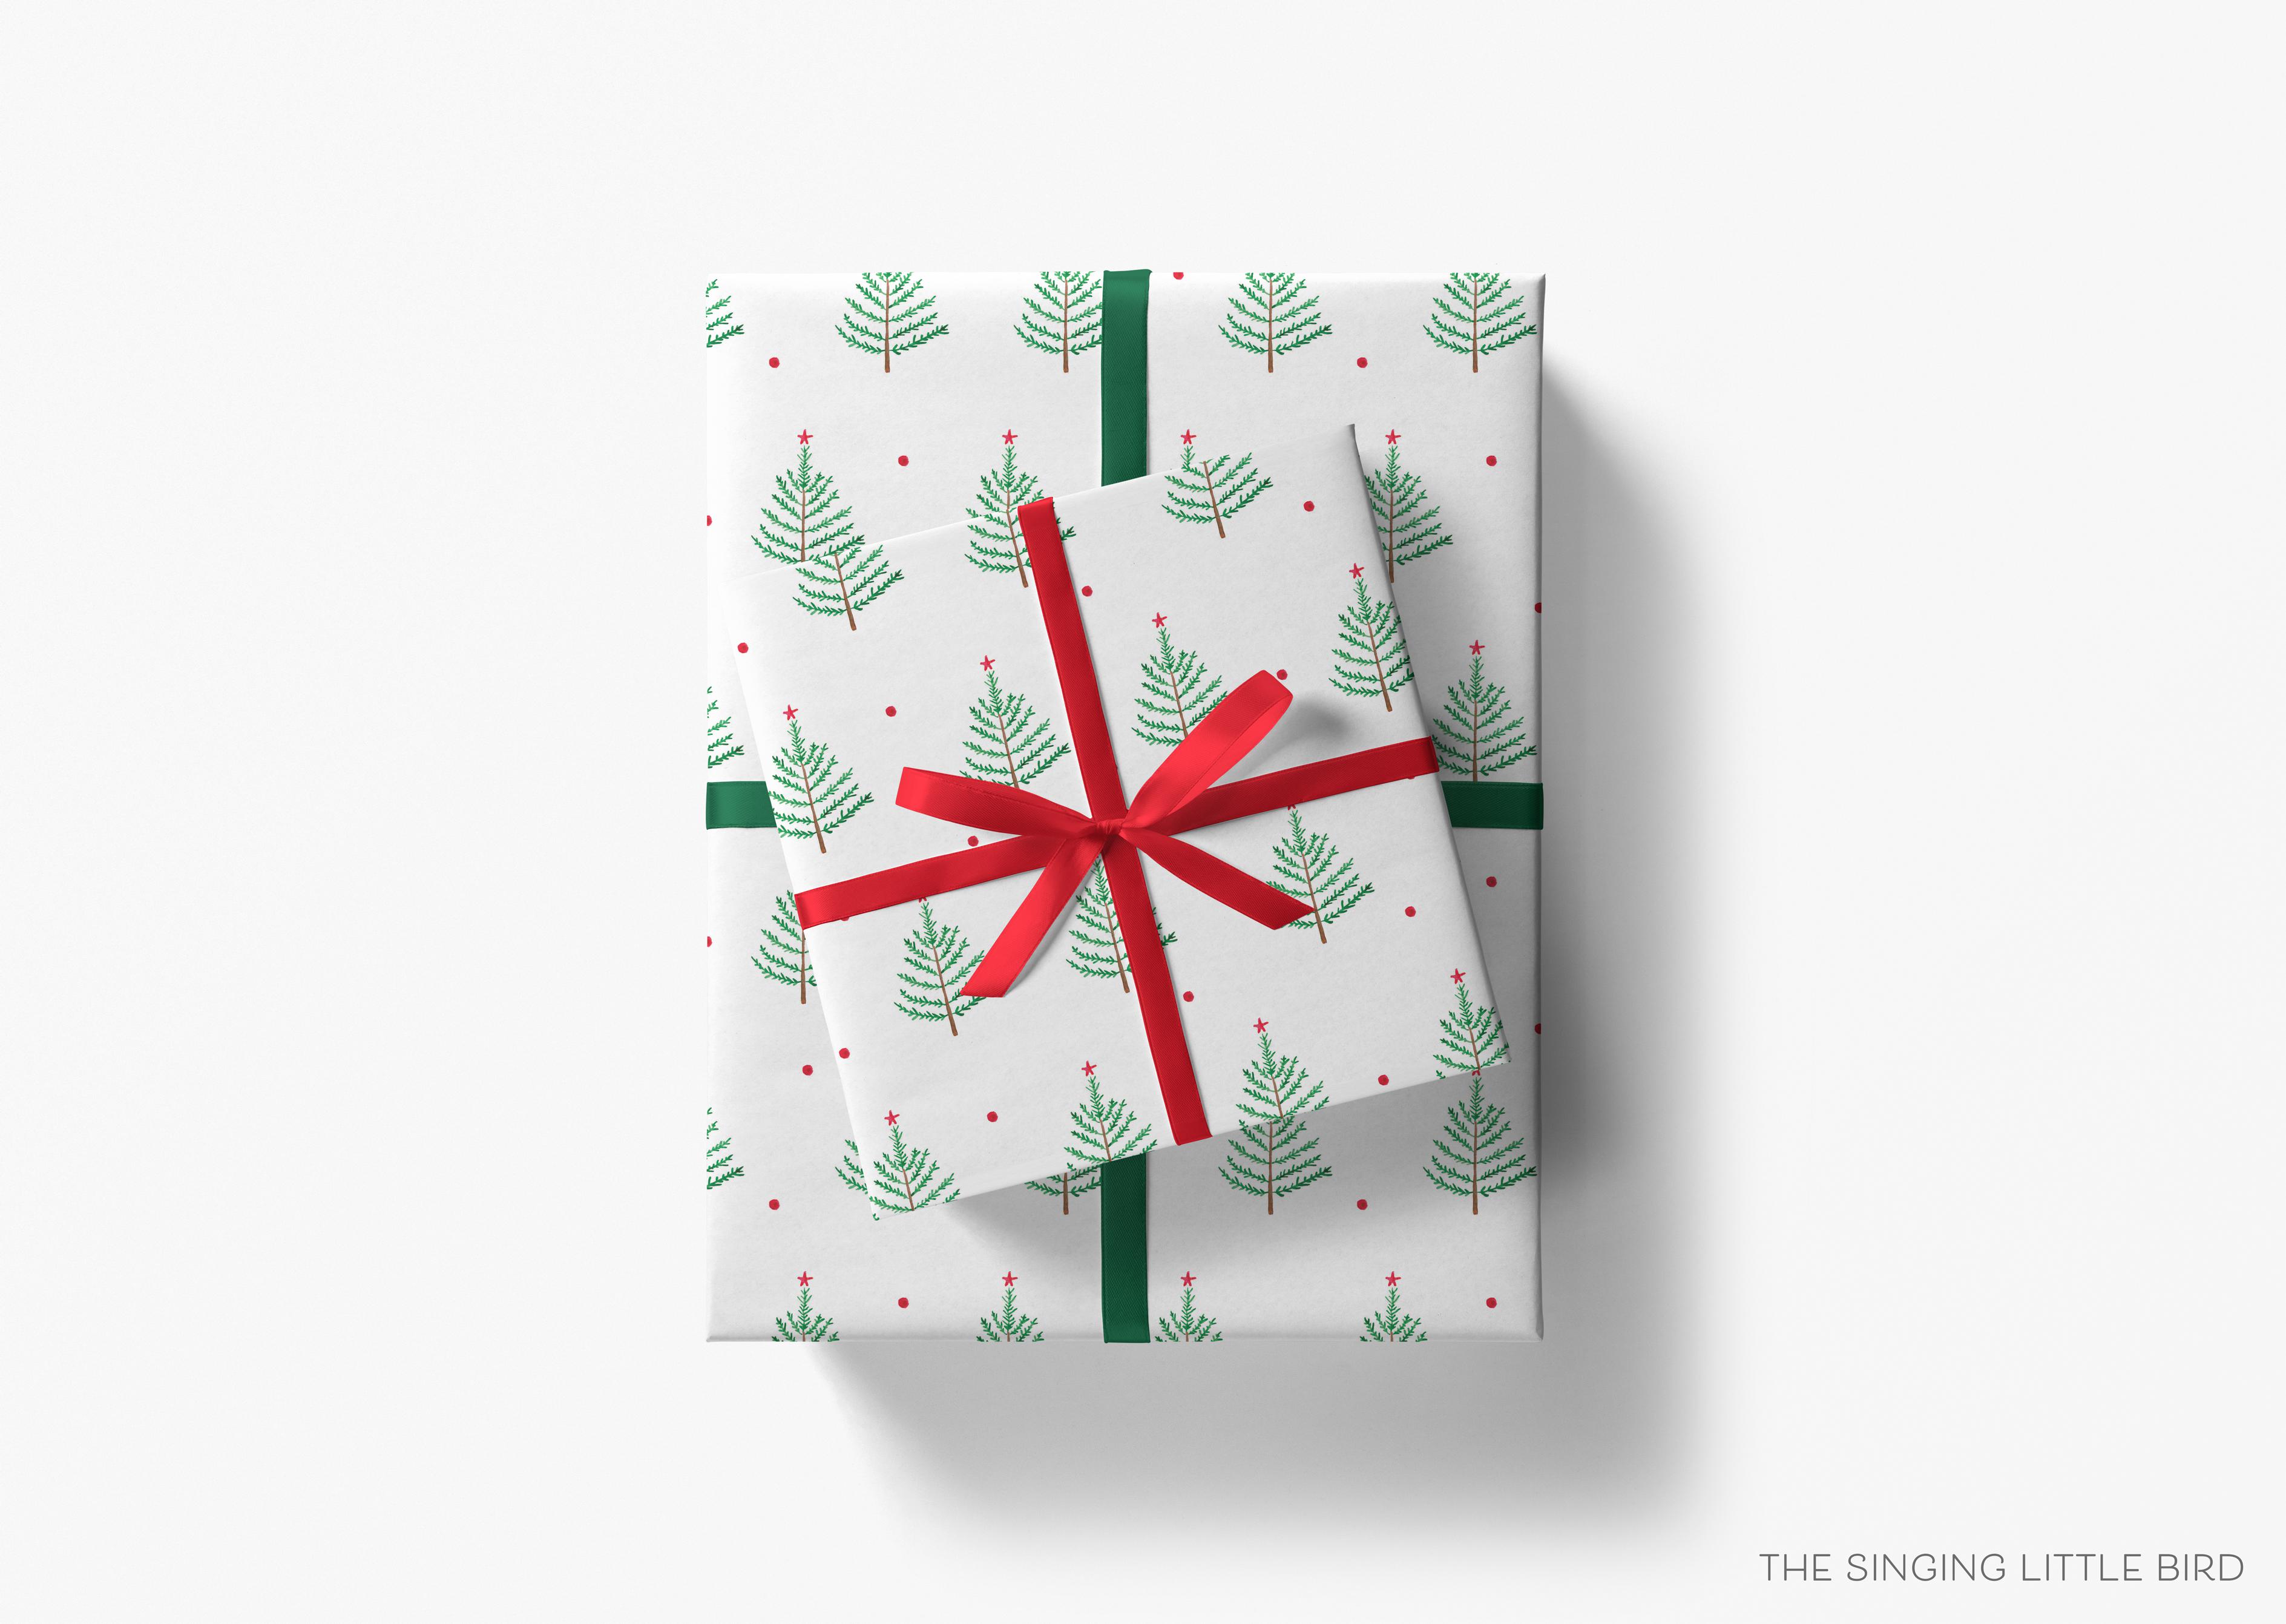 Evergreen Branch Christmas Gift Wrap-This matte finish gift wrap features our hand-painted evergreen branches. It makes a perfect wrapping paper for a holiday present. -The Singing Little Bird